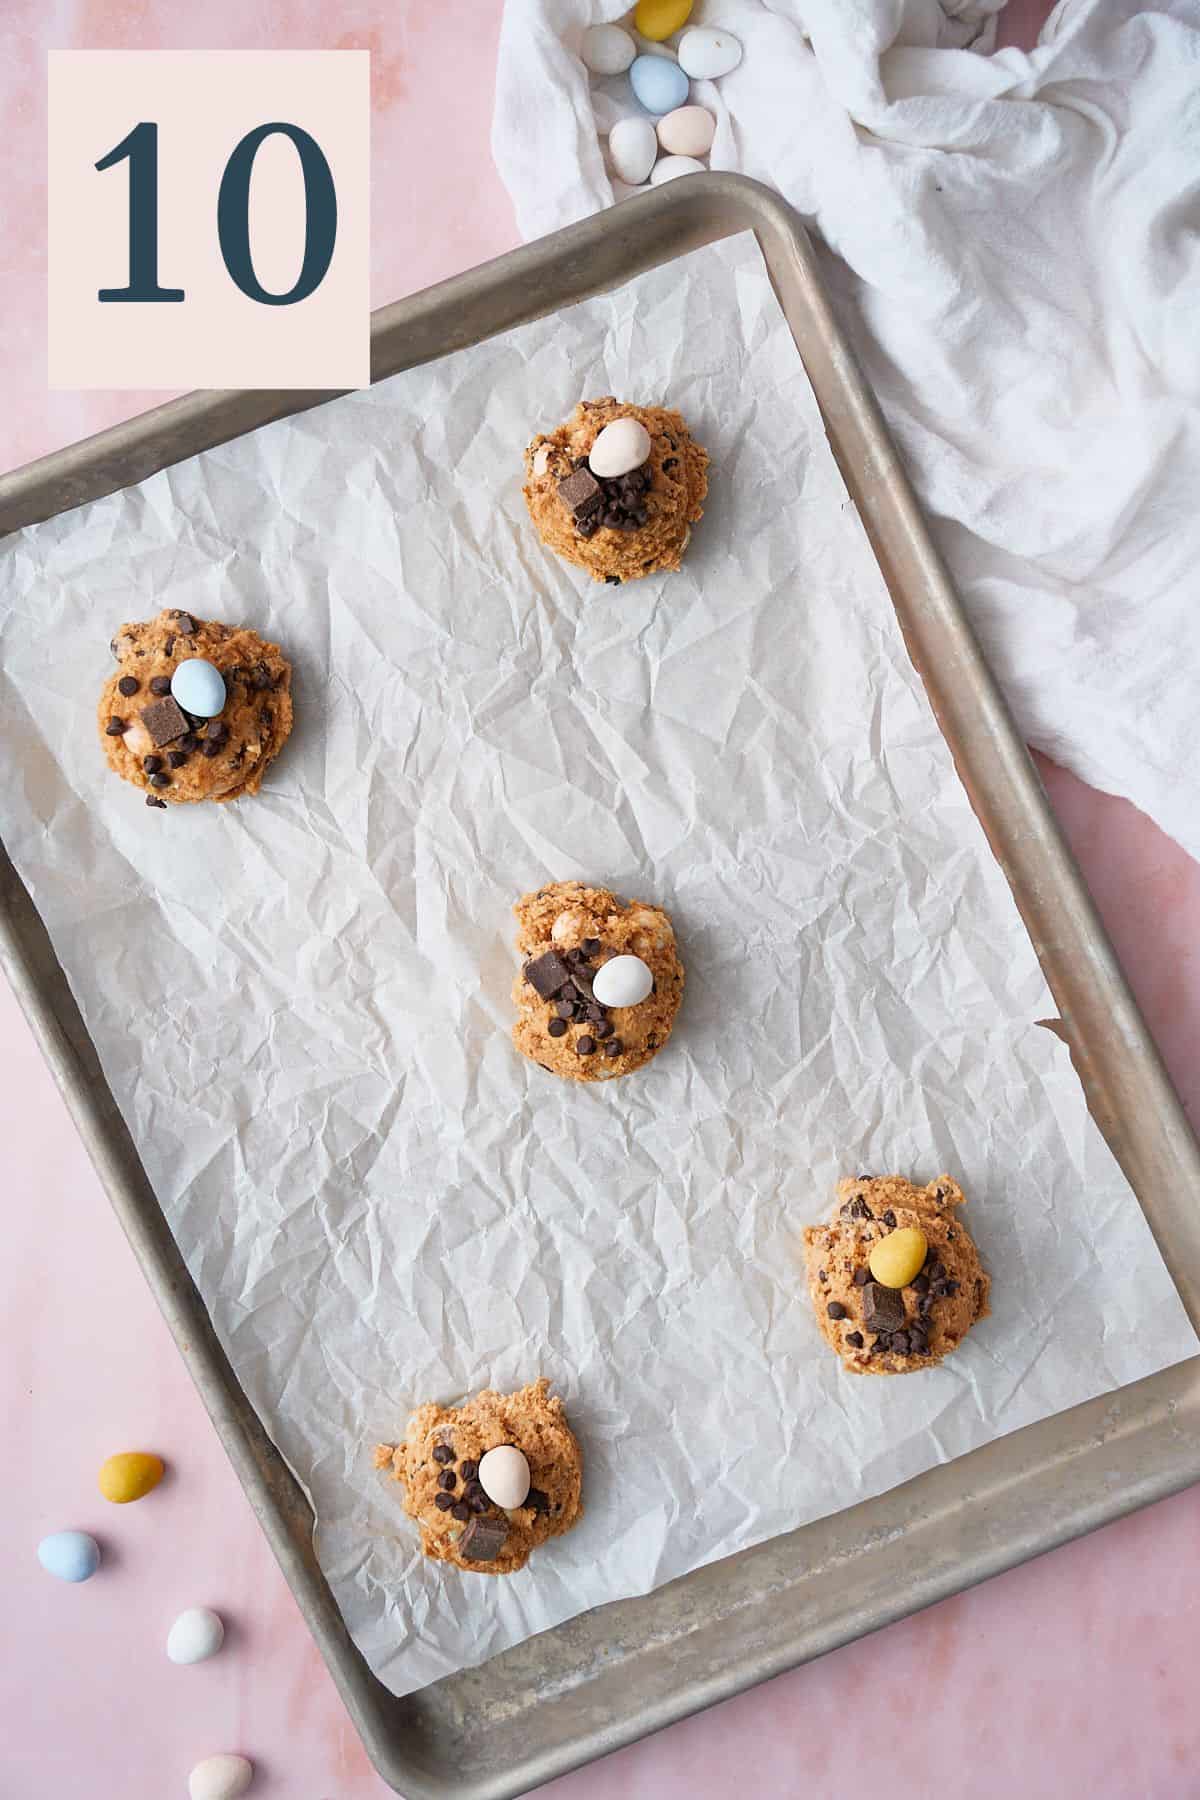 5 balls of cookie dough on a parchment lined baking sheet spread out to give them room. 